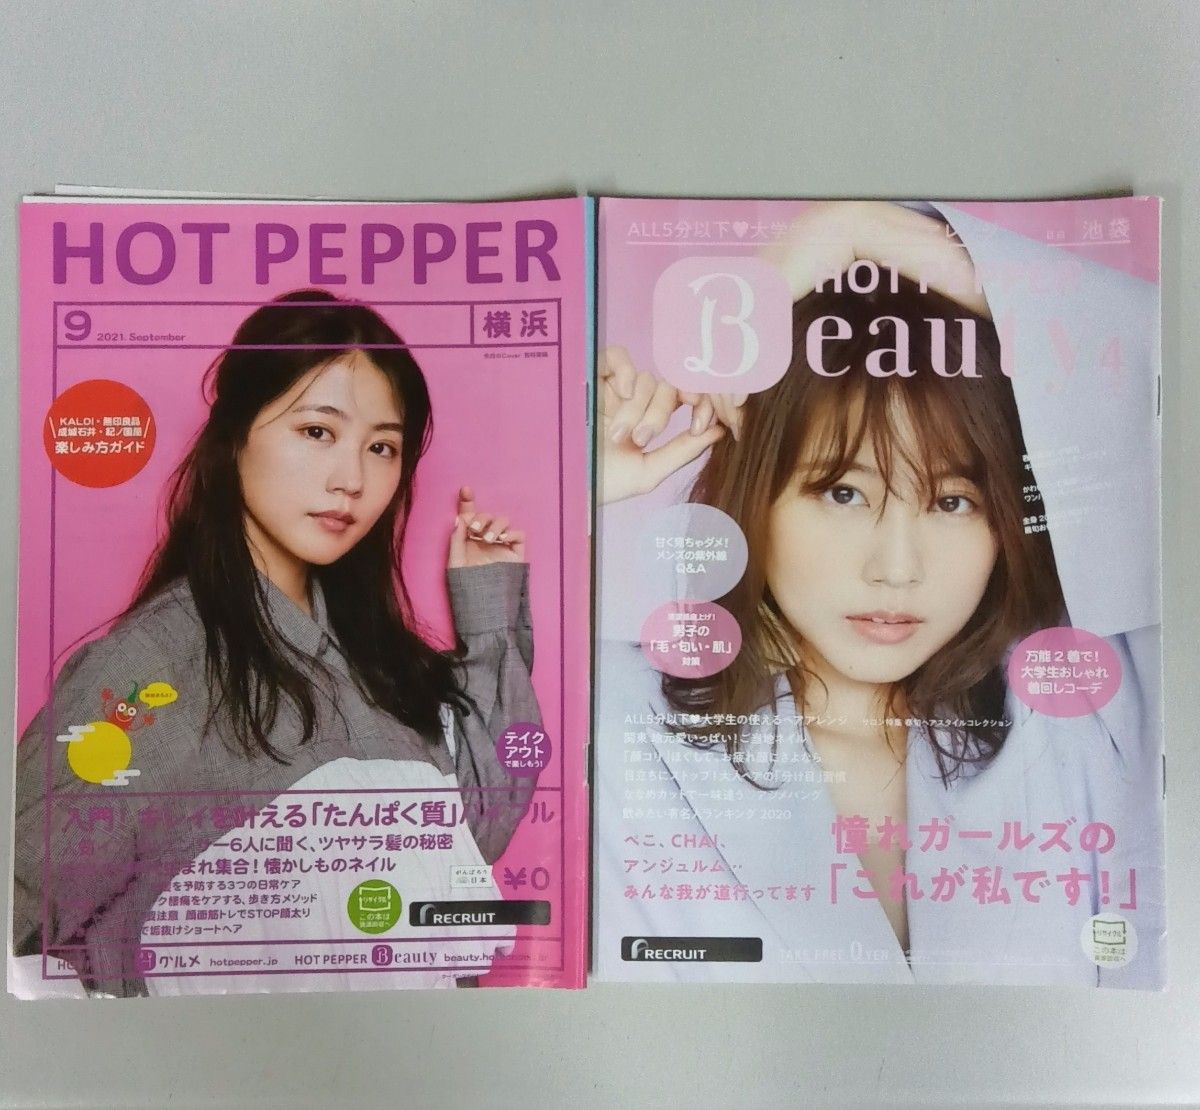 HOT PEPPER ホットペッパー 有村架純 2冊セット 